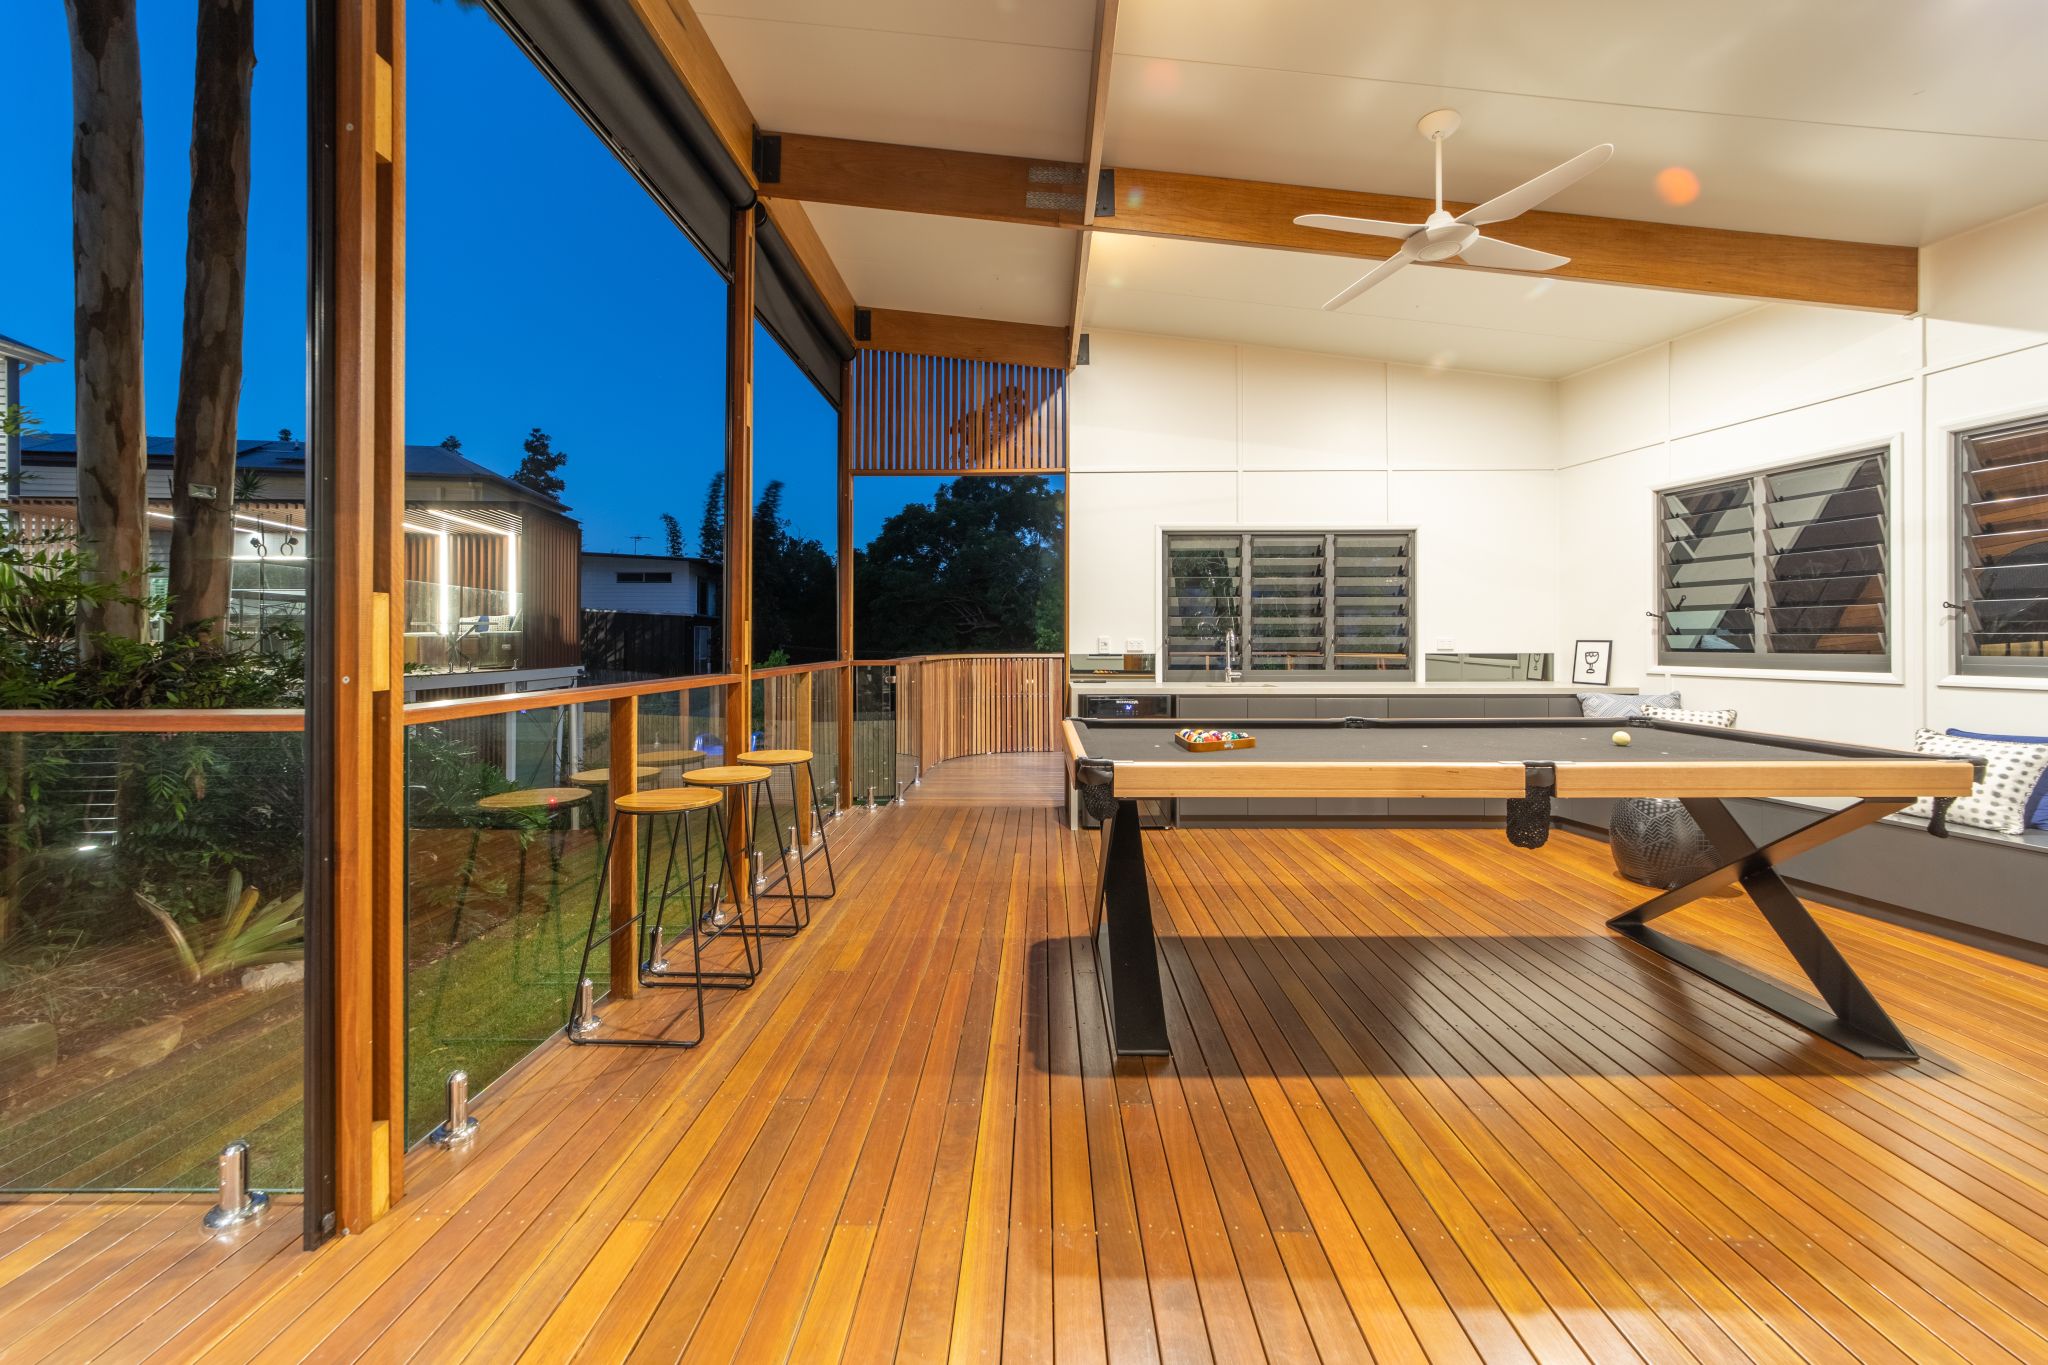 An expansive wooden deck during early evening, featuring a high-gloss EnduroShield finish that enhances the wood's natural grain and provides protection. The deck is furnished with bar stools and boasts a large, stylish black ping-pong table. Glass balustrades with sleek metal posts offer an unobstructed view of the neighboring area. The indoor space is visible through large windows and includes a modern kitchen and living area, unified by warm wood tones and a clean white ceiling with a ceiling fan.